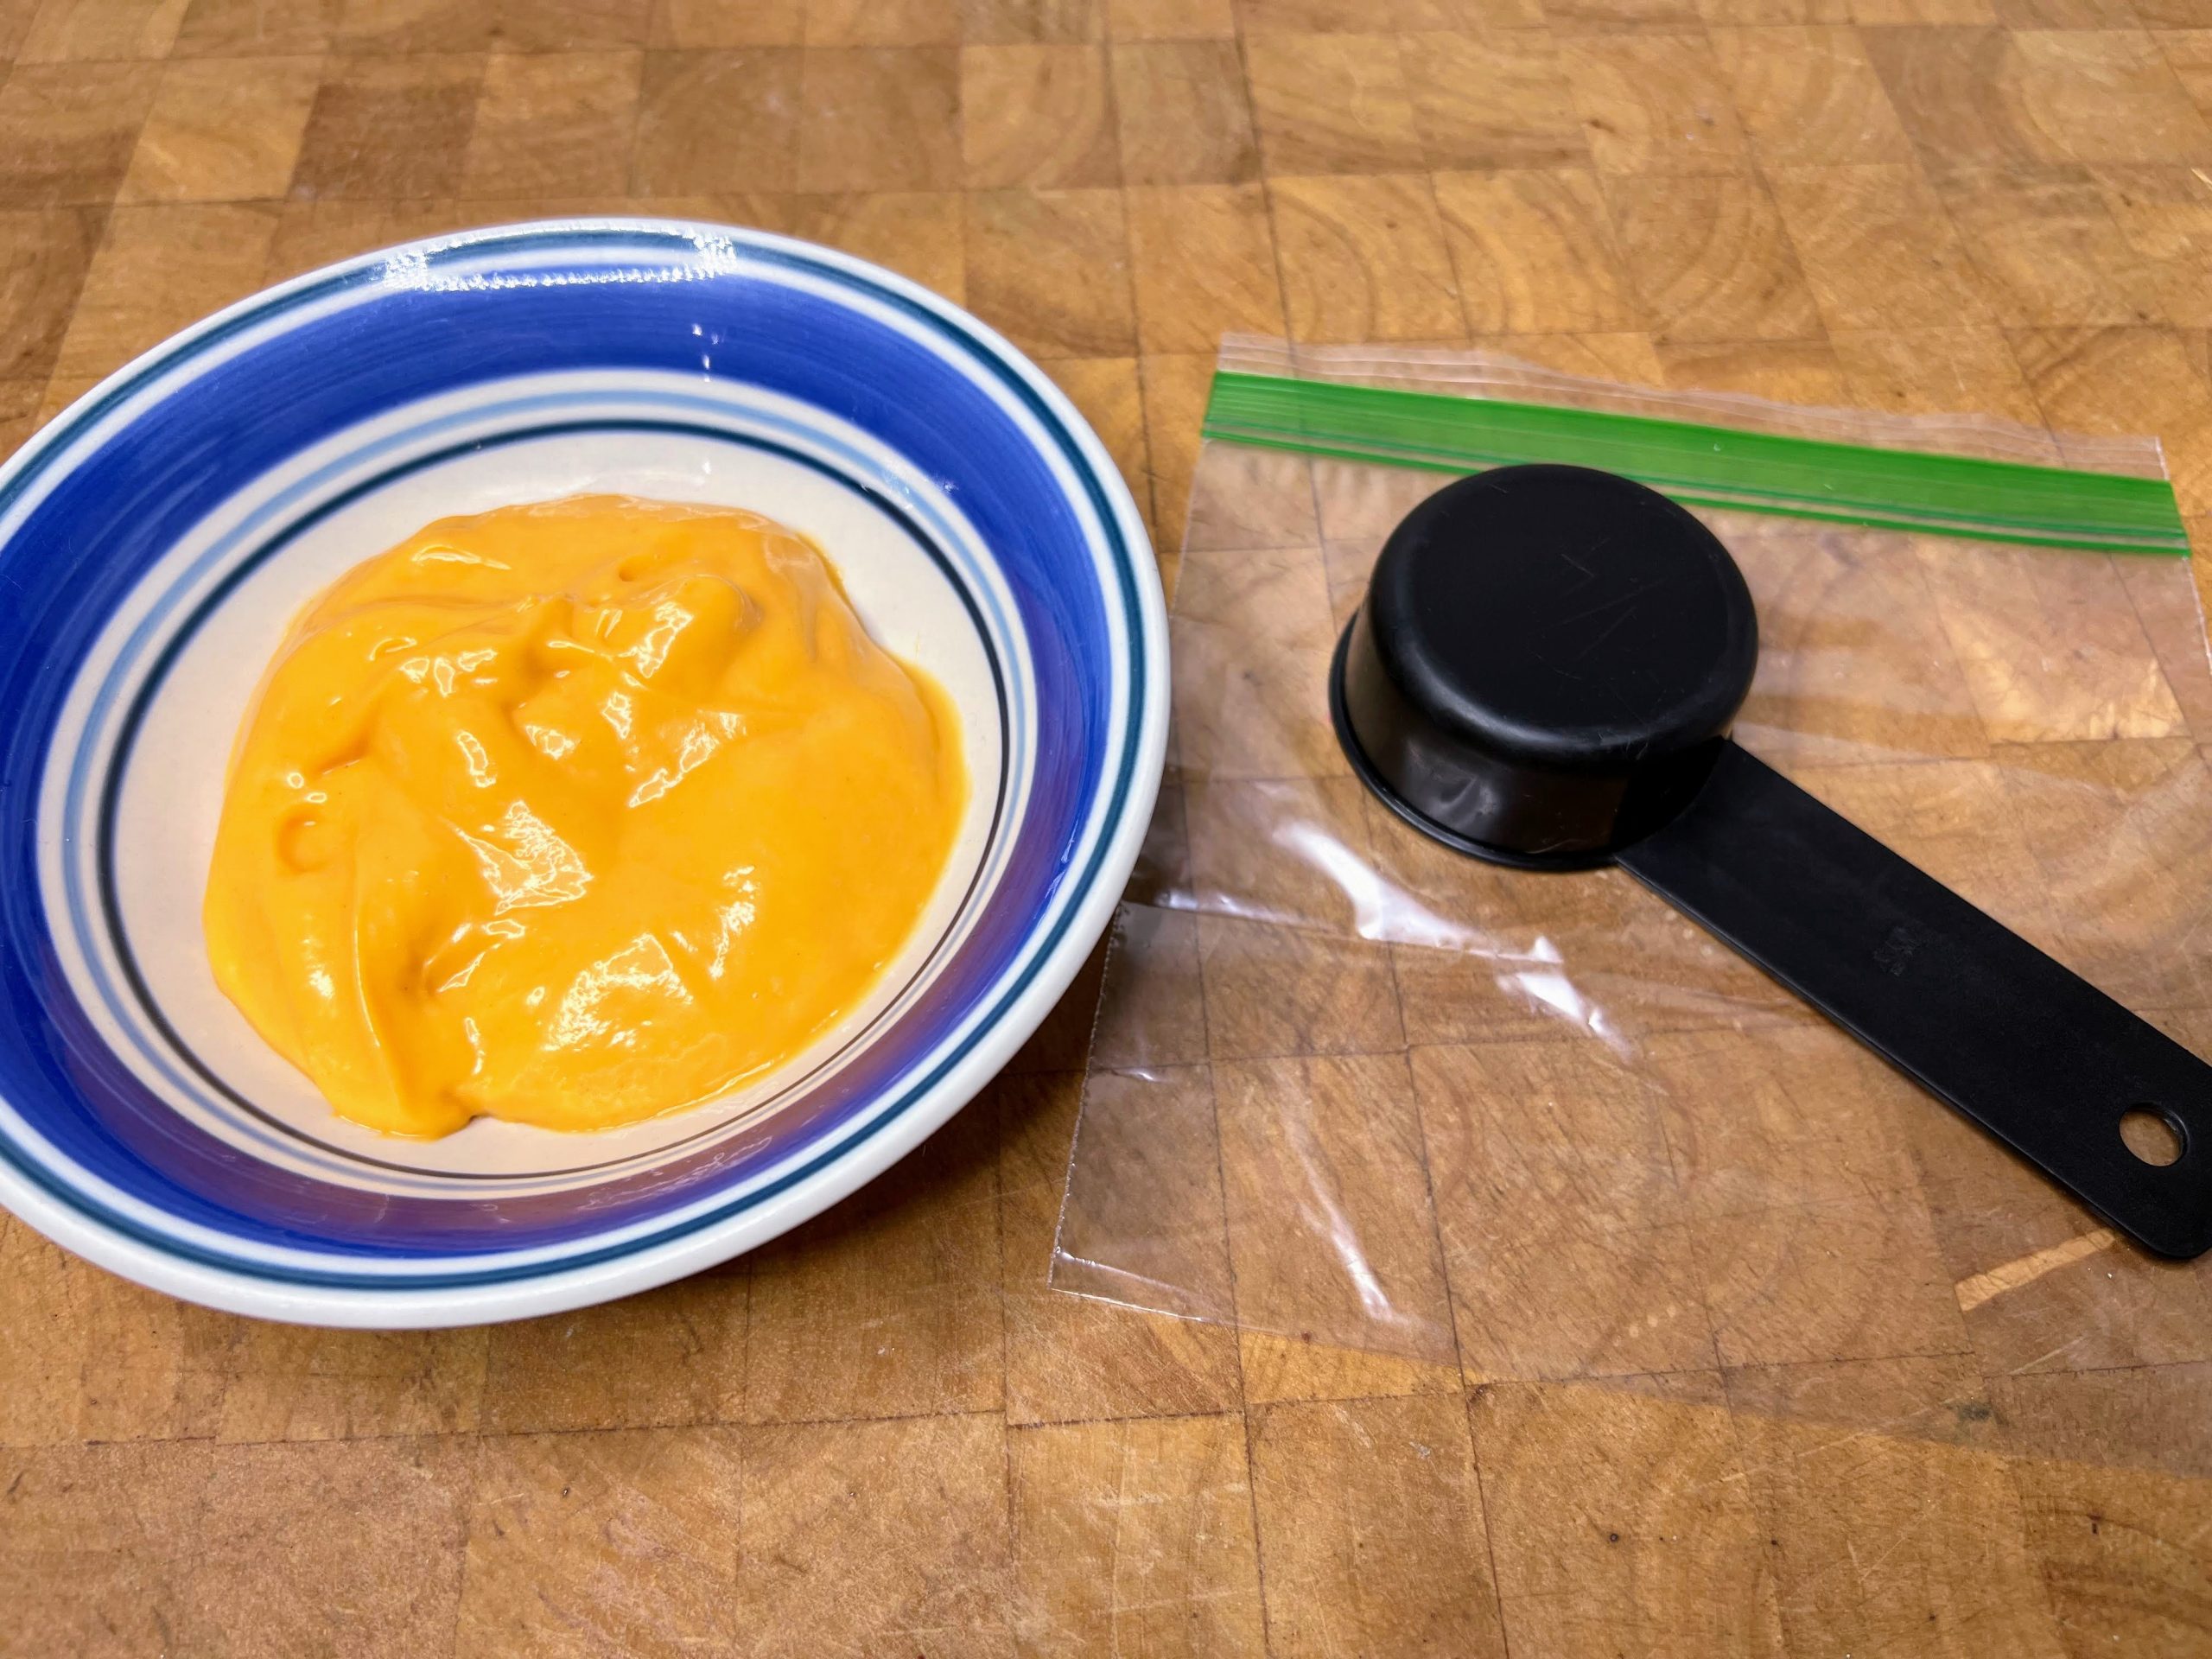 bowl of nacho cheese next to an empty freezer bag and a measuring cup